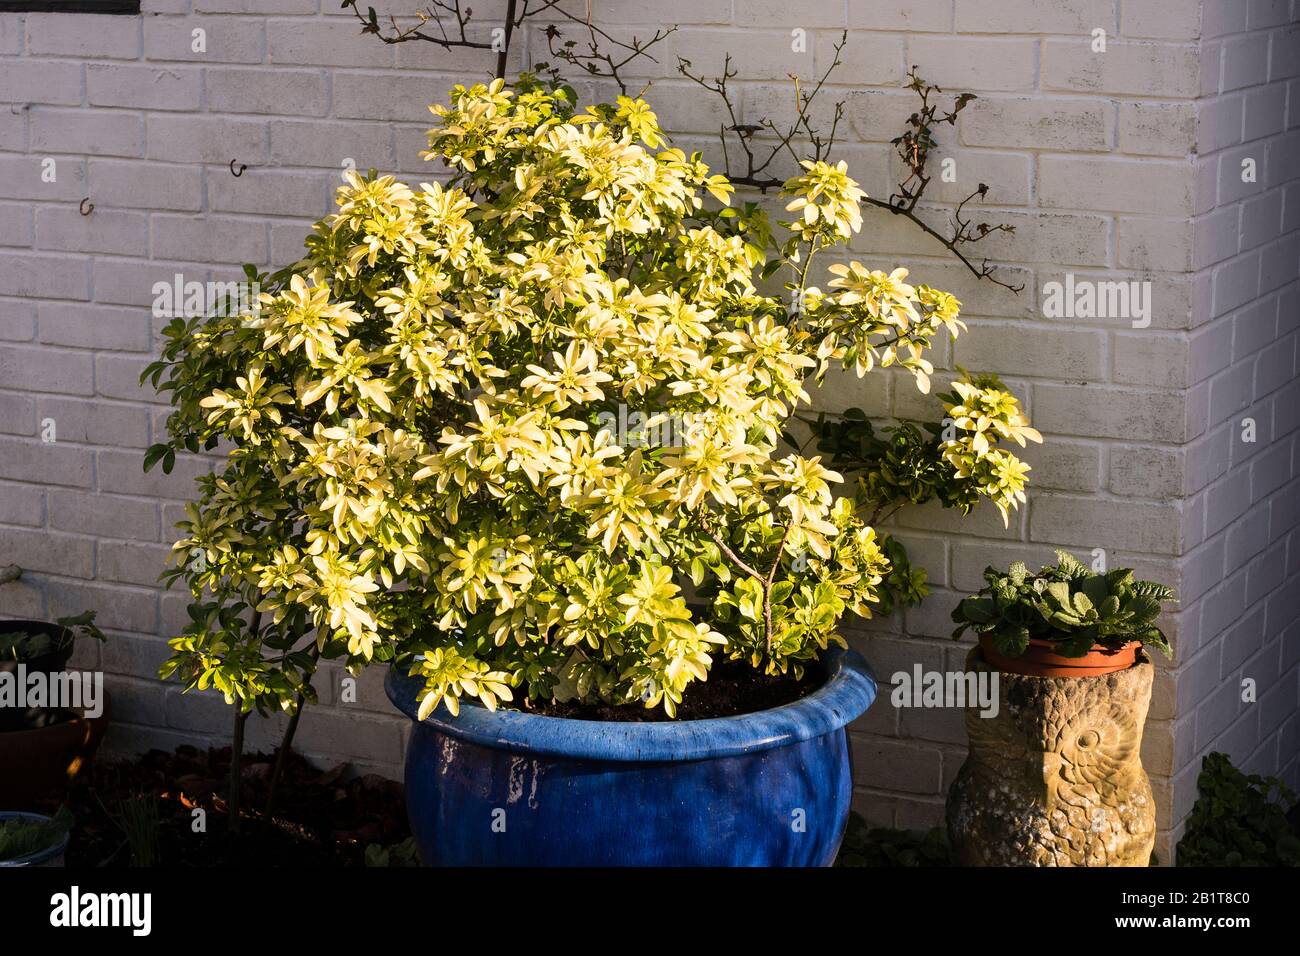 A glowing example of a well-chosen plant (Choisya ternata Sundance) which adds golden light on even the darkest days of winter. Growing in a large blue planter Stock Photo